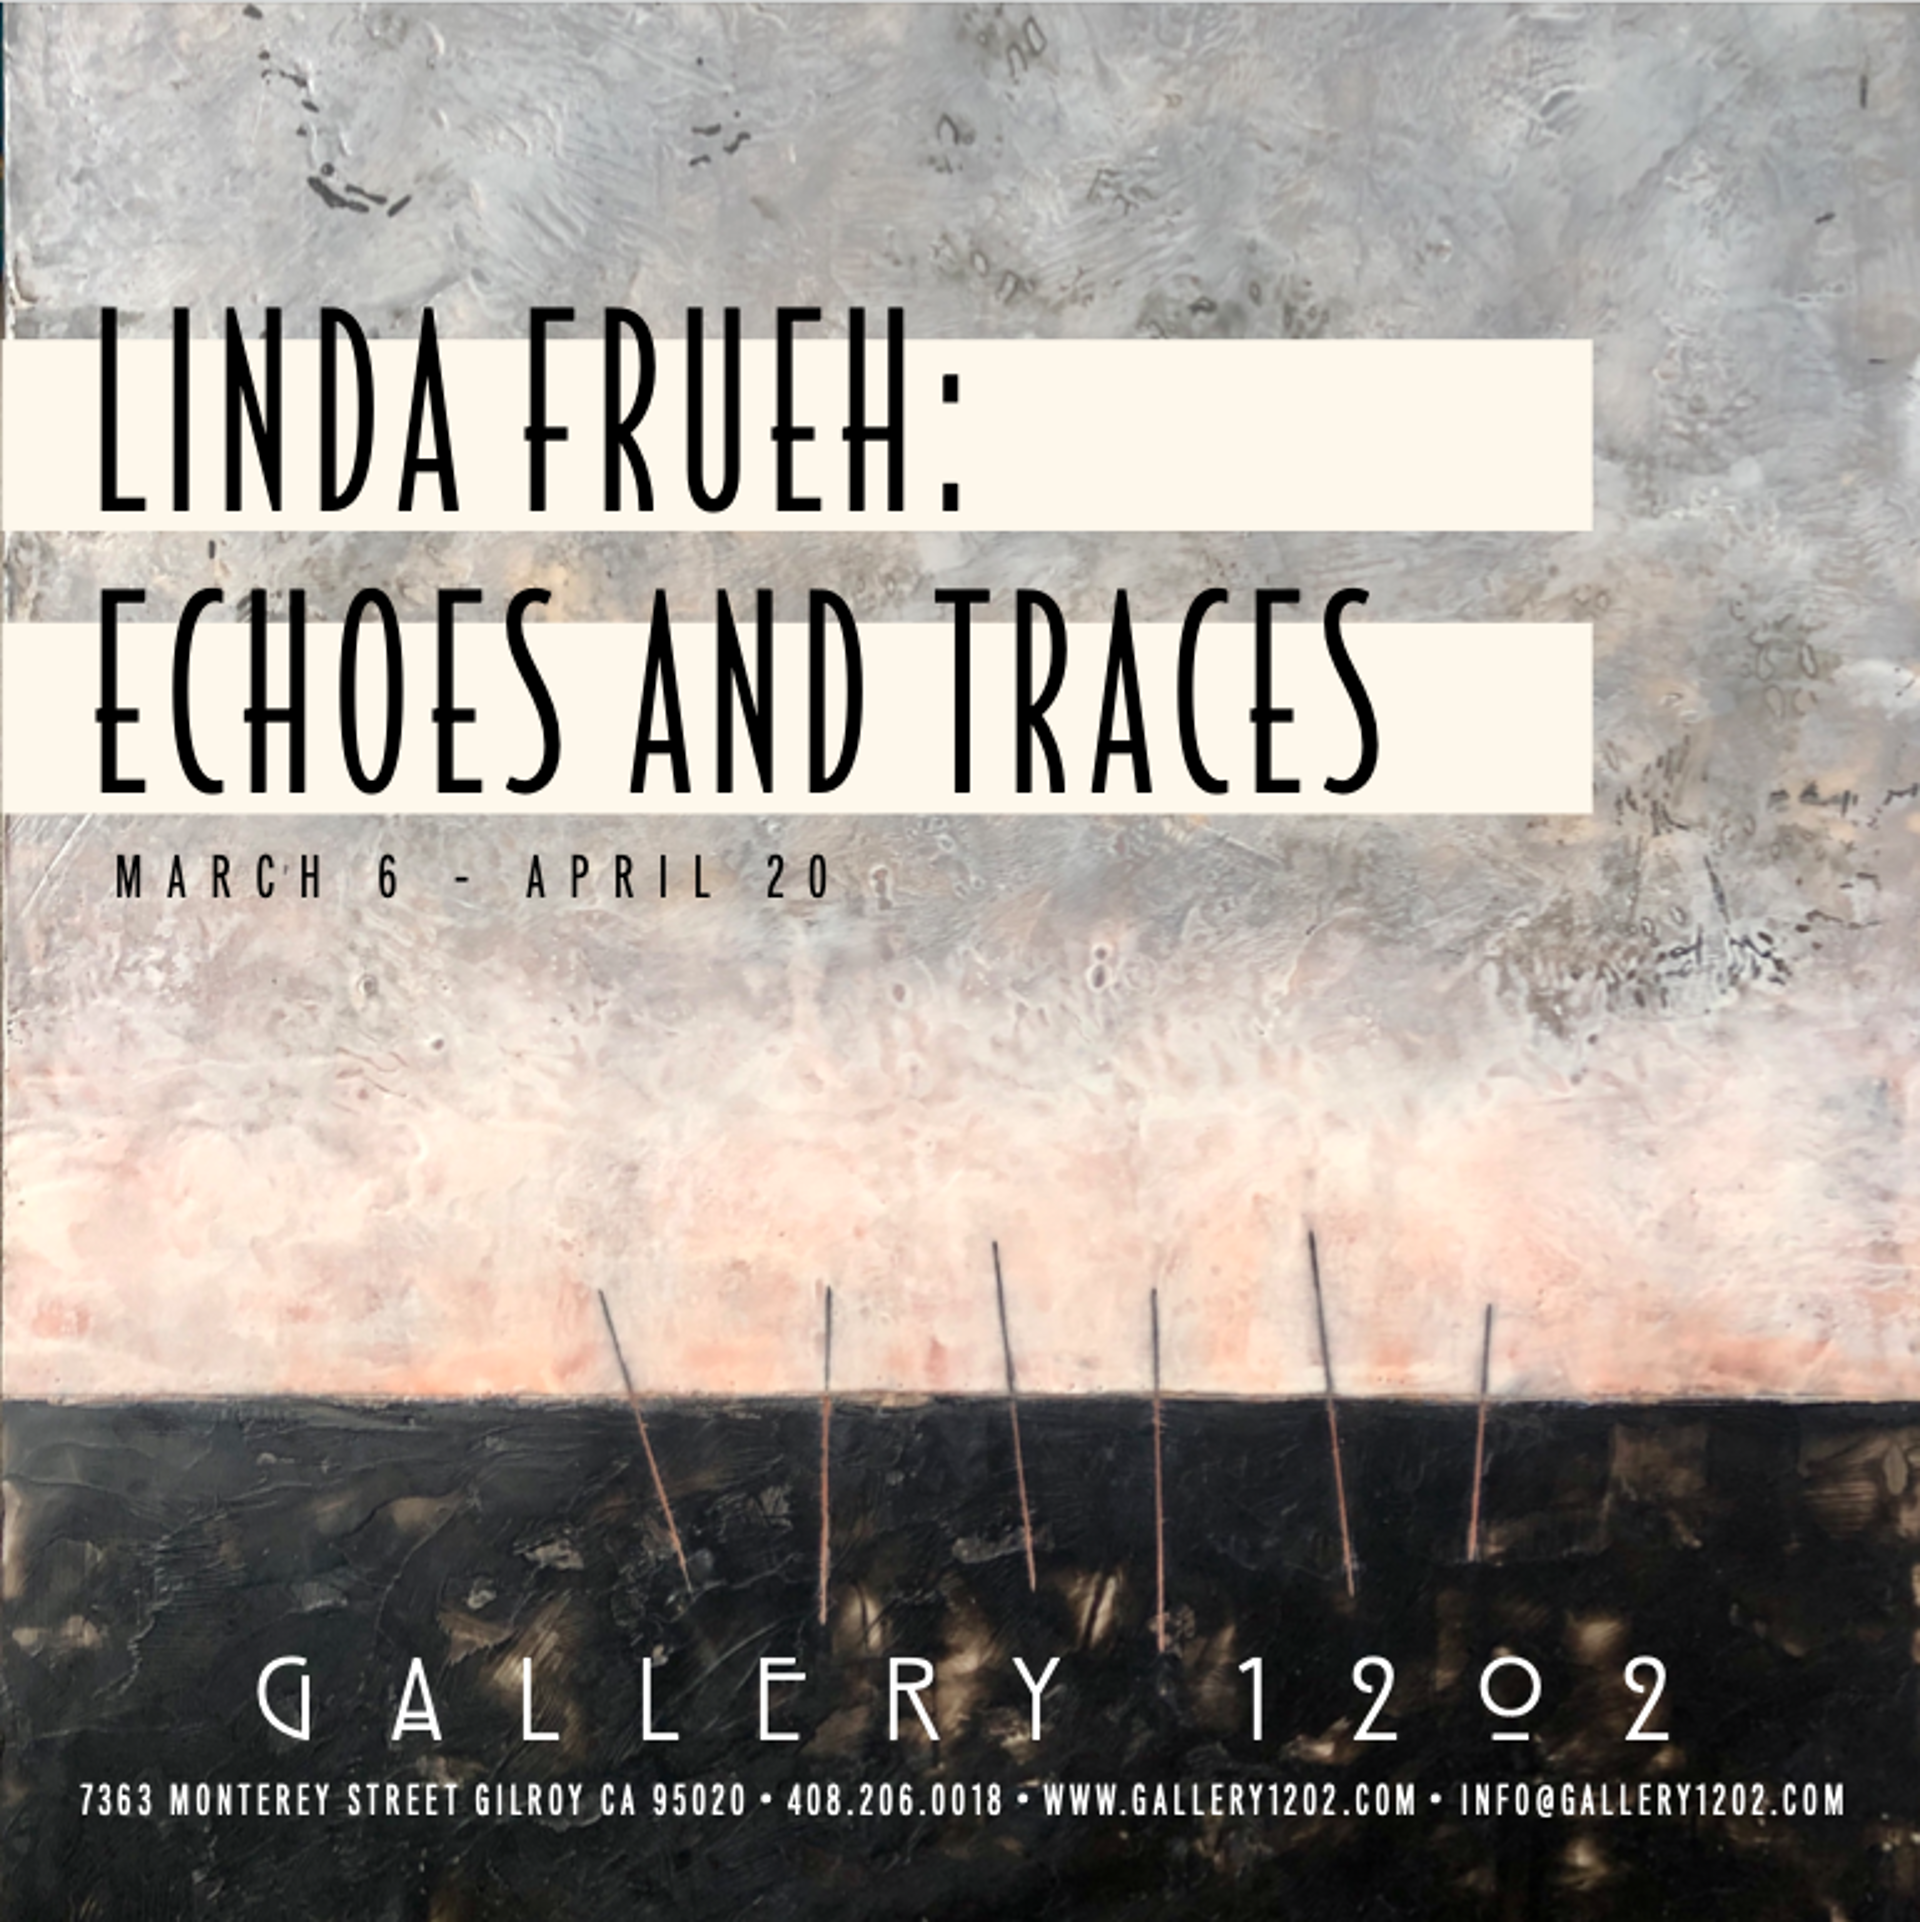 Echoes and Traces Catalog